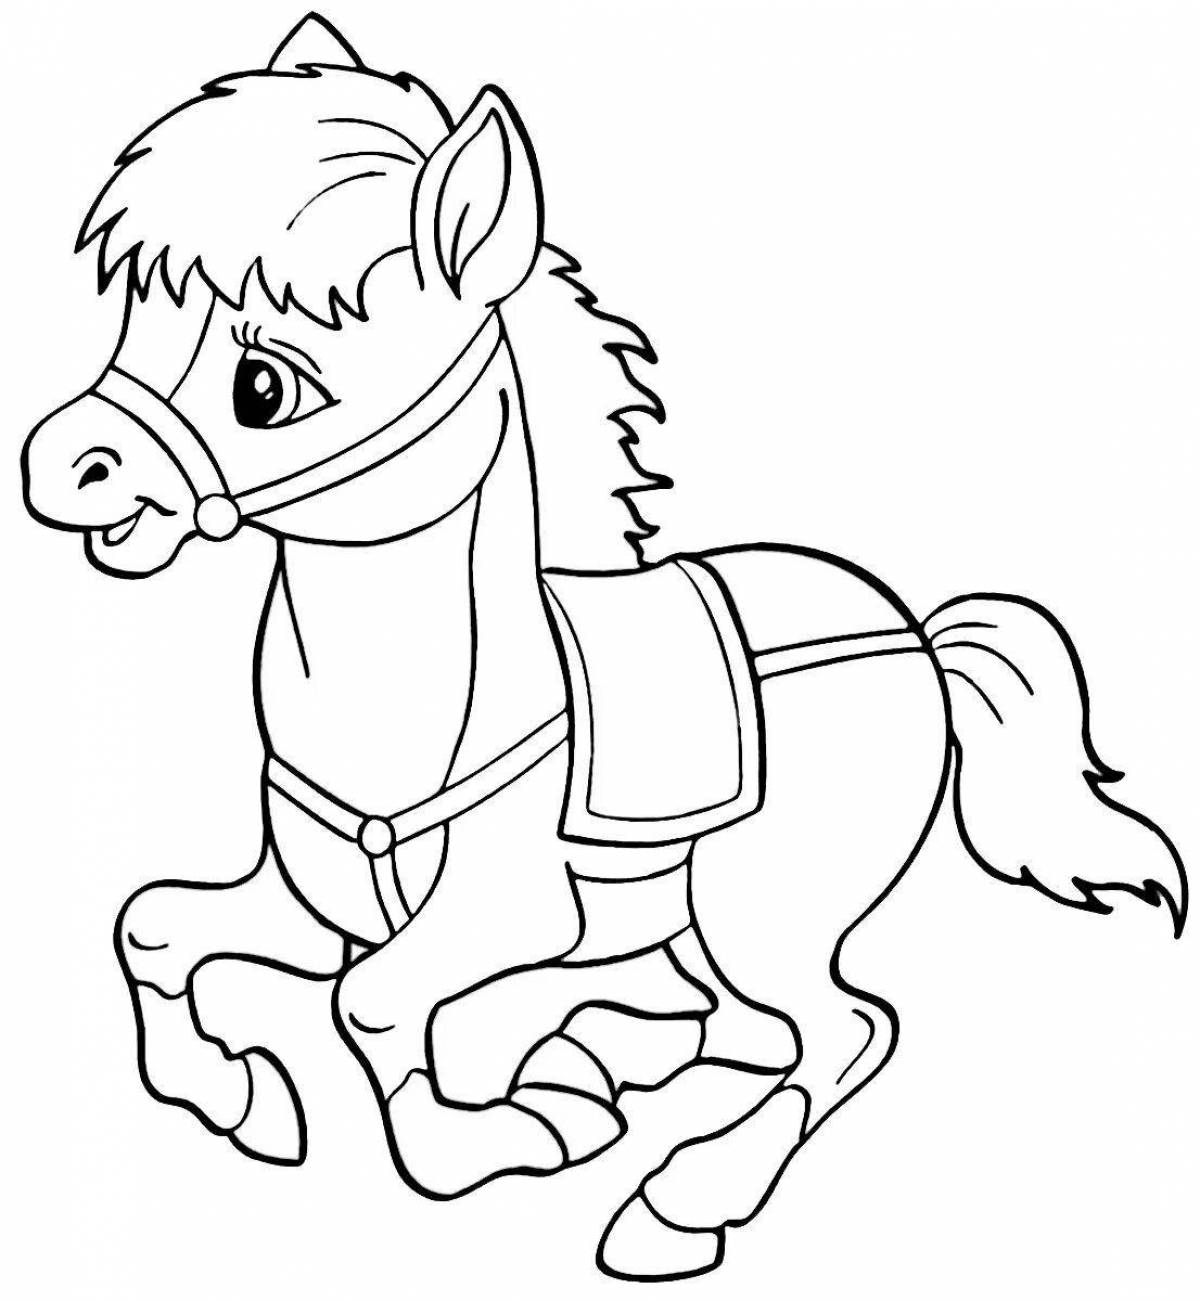 Great horse coloring book for 4-5 year olds